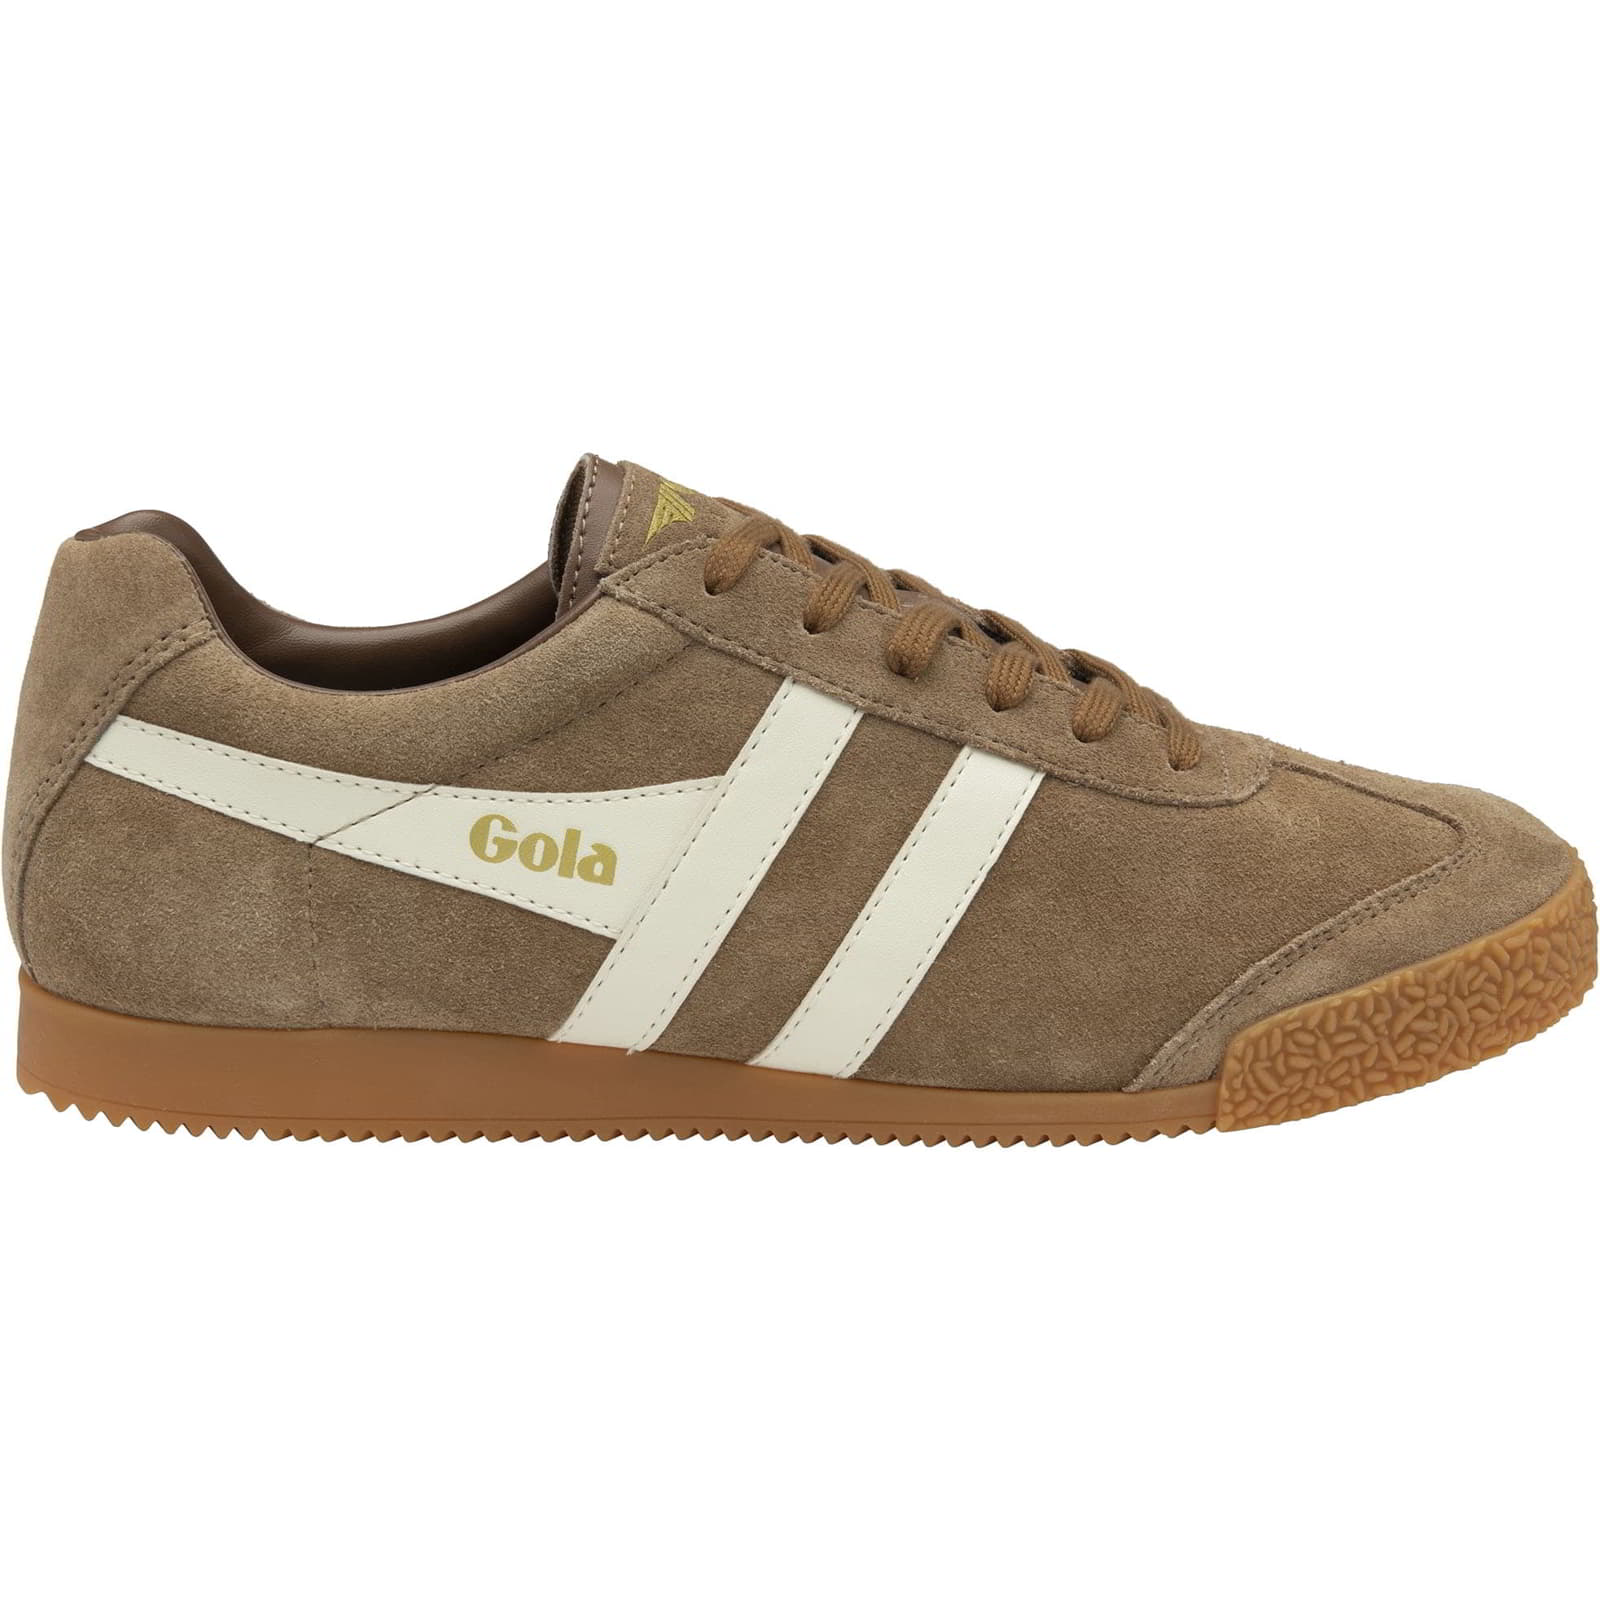 Gola Mens Harrier Trainers - Tobacco Off White 2951